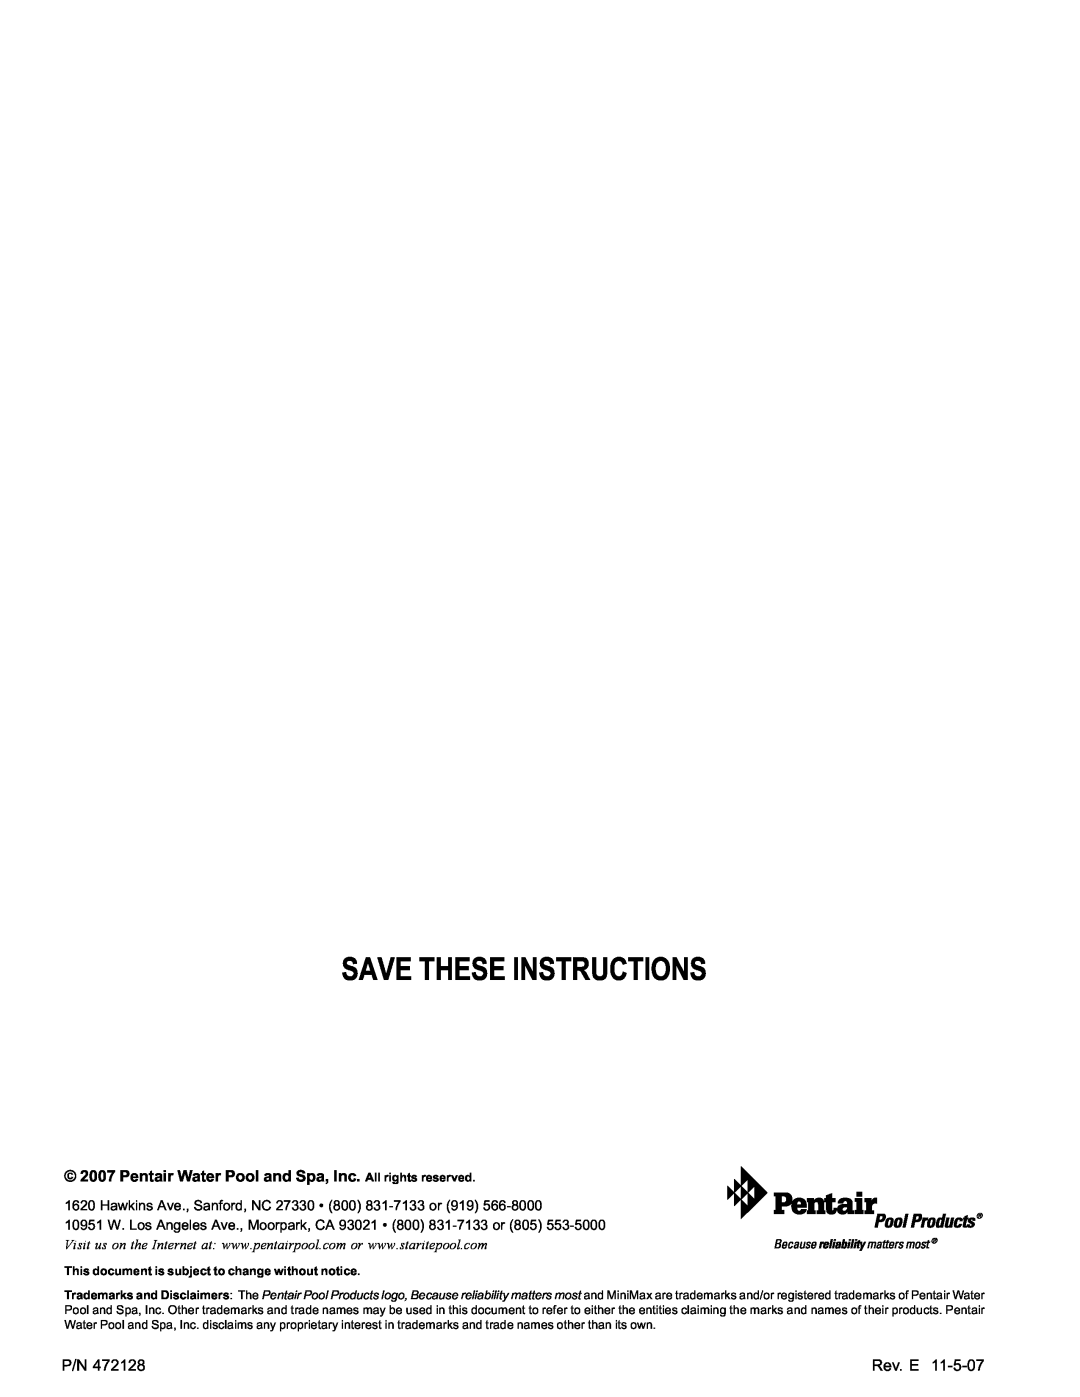 Pentair Hot Tub manual Save These Instructions, Pentair Water Pool and Spa, Inc. All rights reserved, Rev. E 